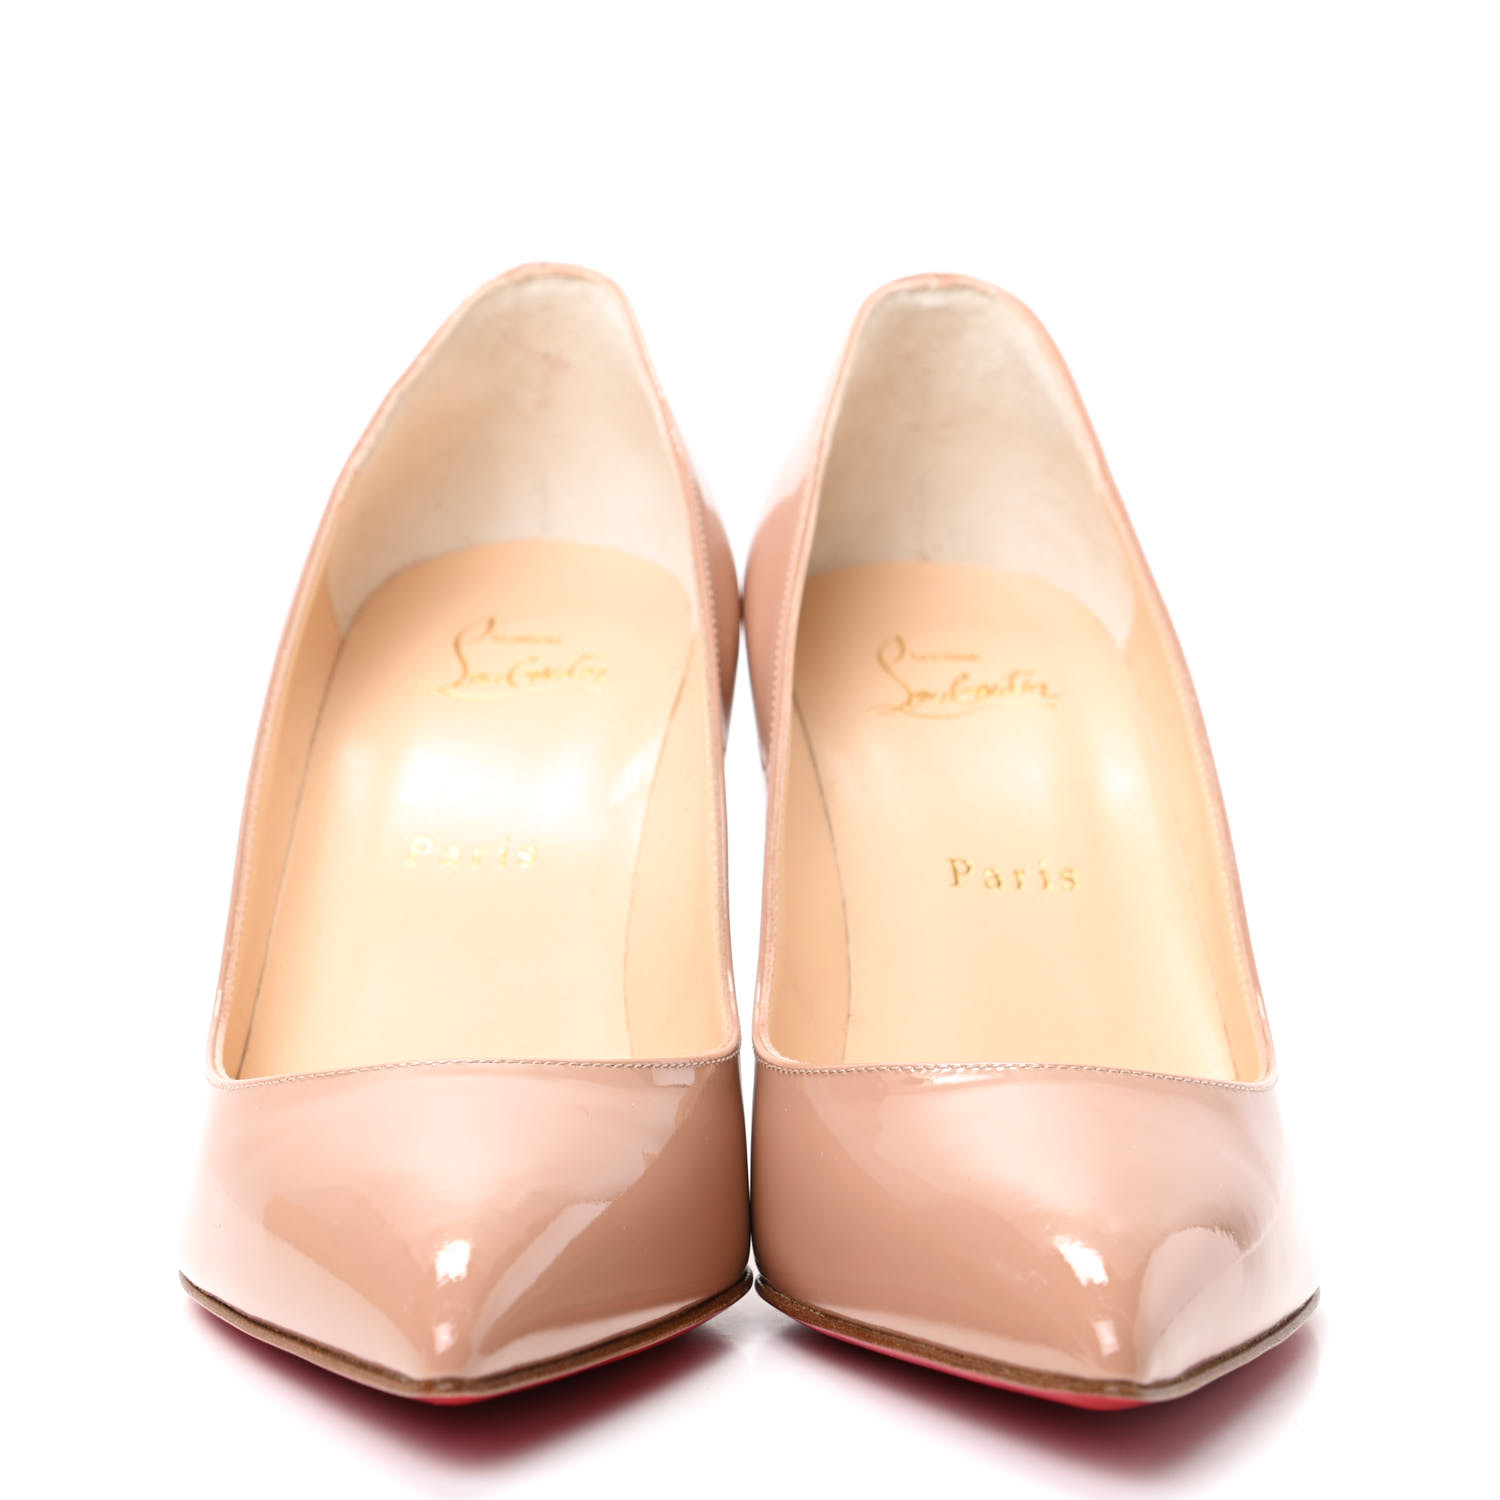 CHRISTIAN LOUBOUTIN Patent Pigalle 85 Pumps Nude 751070 | FASHIONPHILE